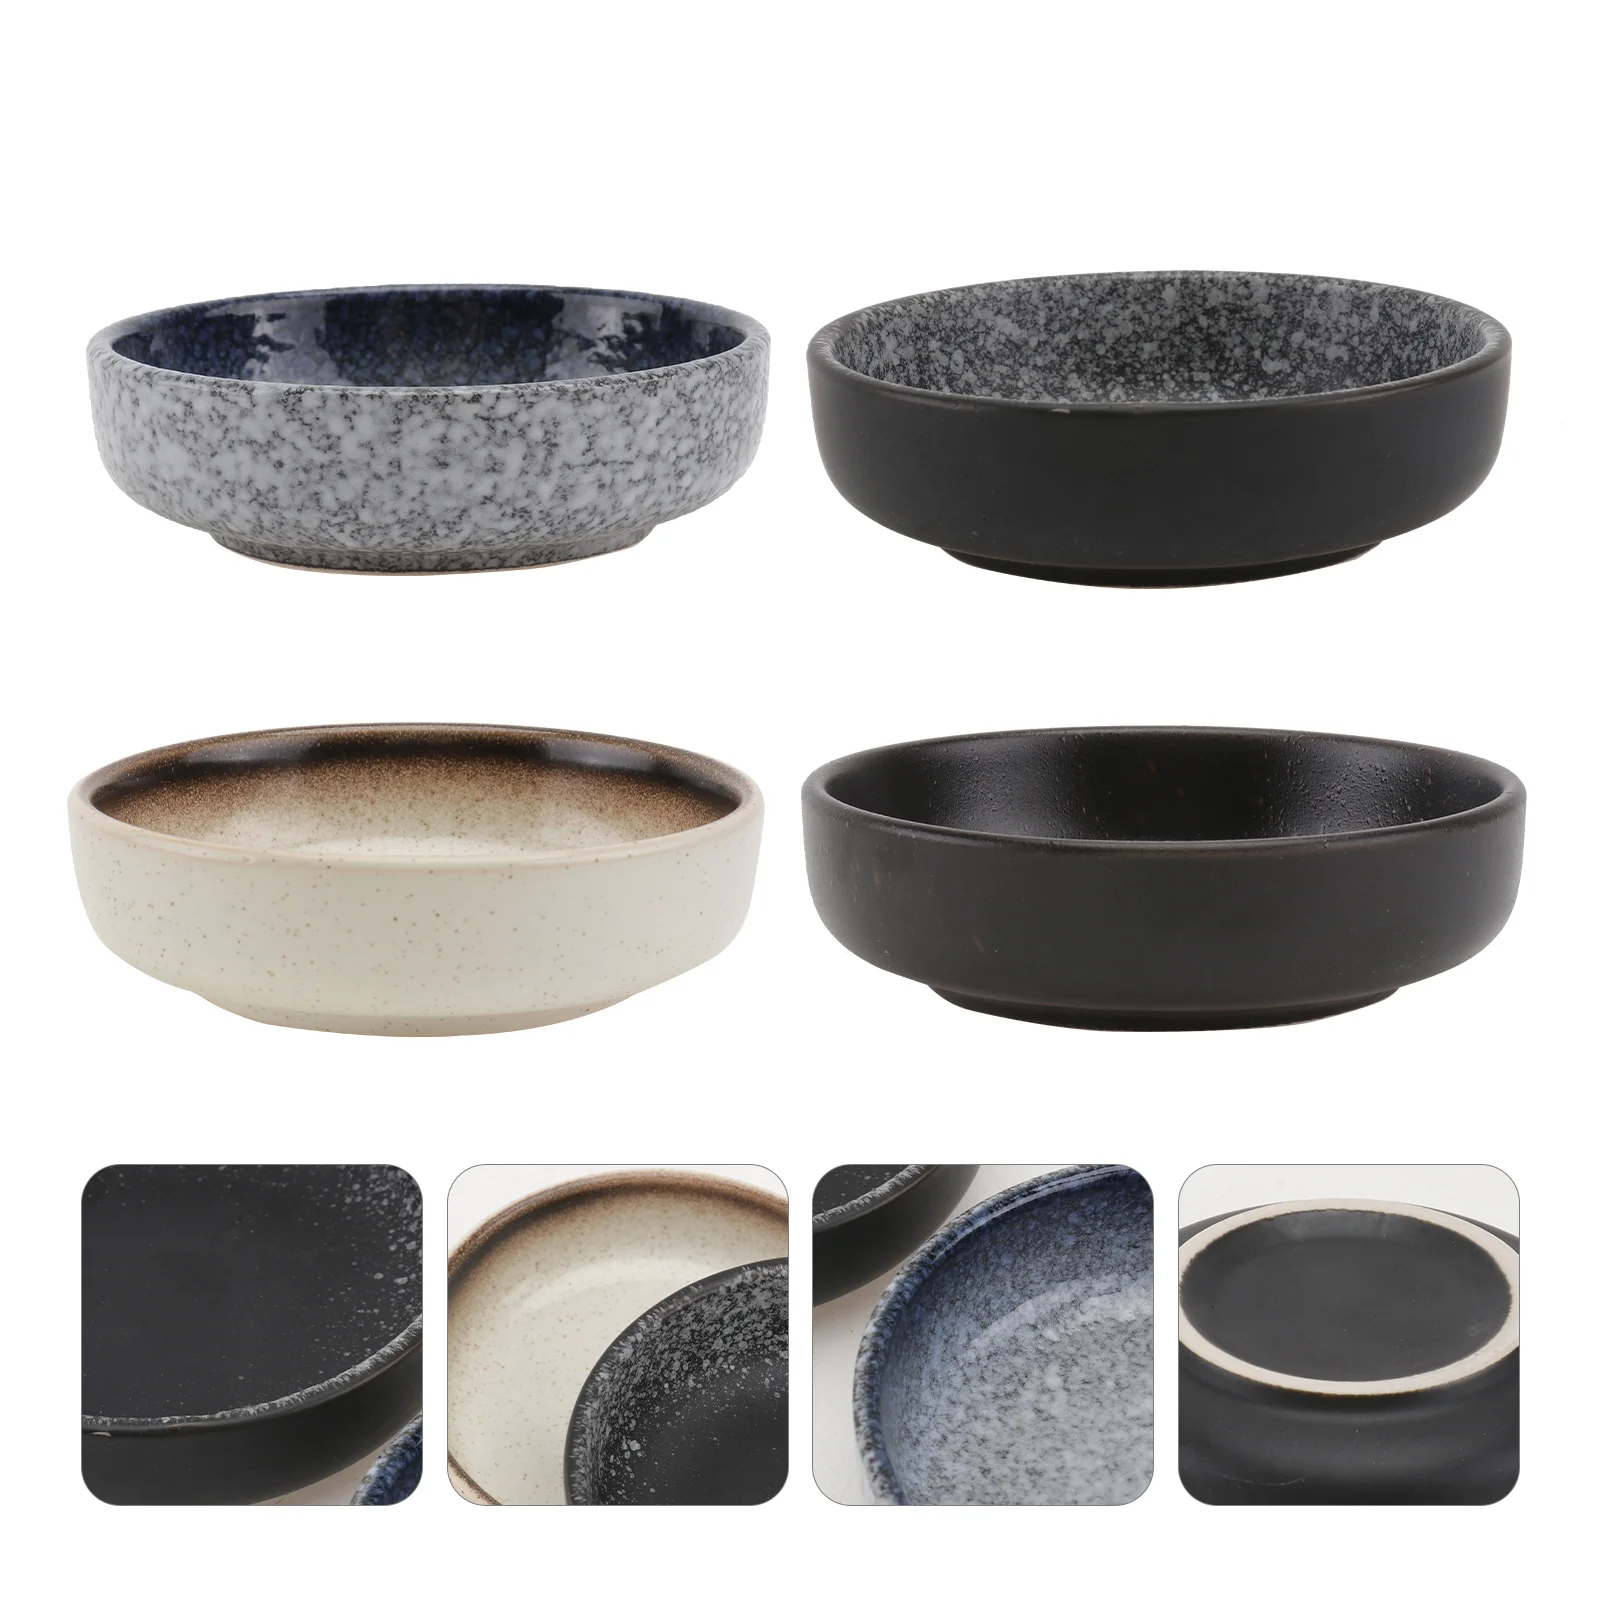 

Dish Sauce Dipping Bowl Ceramic Bowls Plate Dishes Seasoning Sushi Soy Dip Small Plates Serving Appetizer Condiment Snack Wasabi